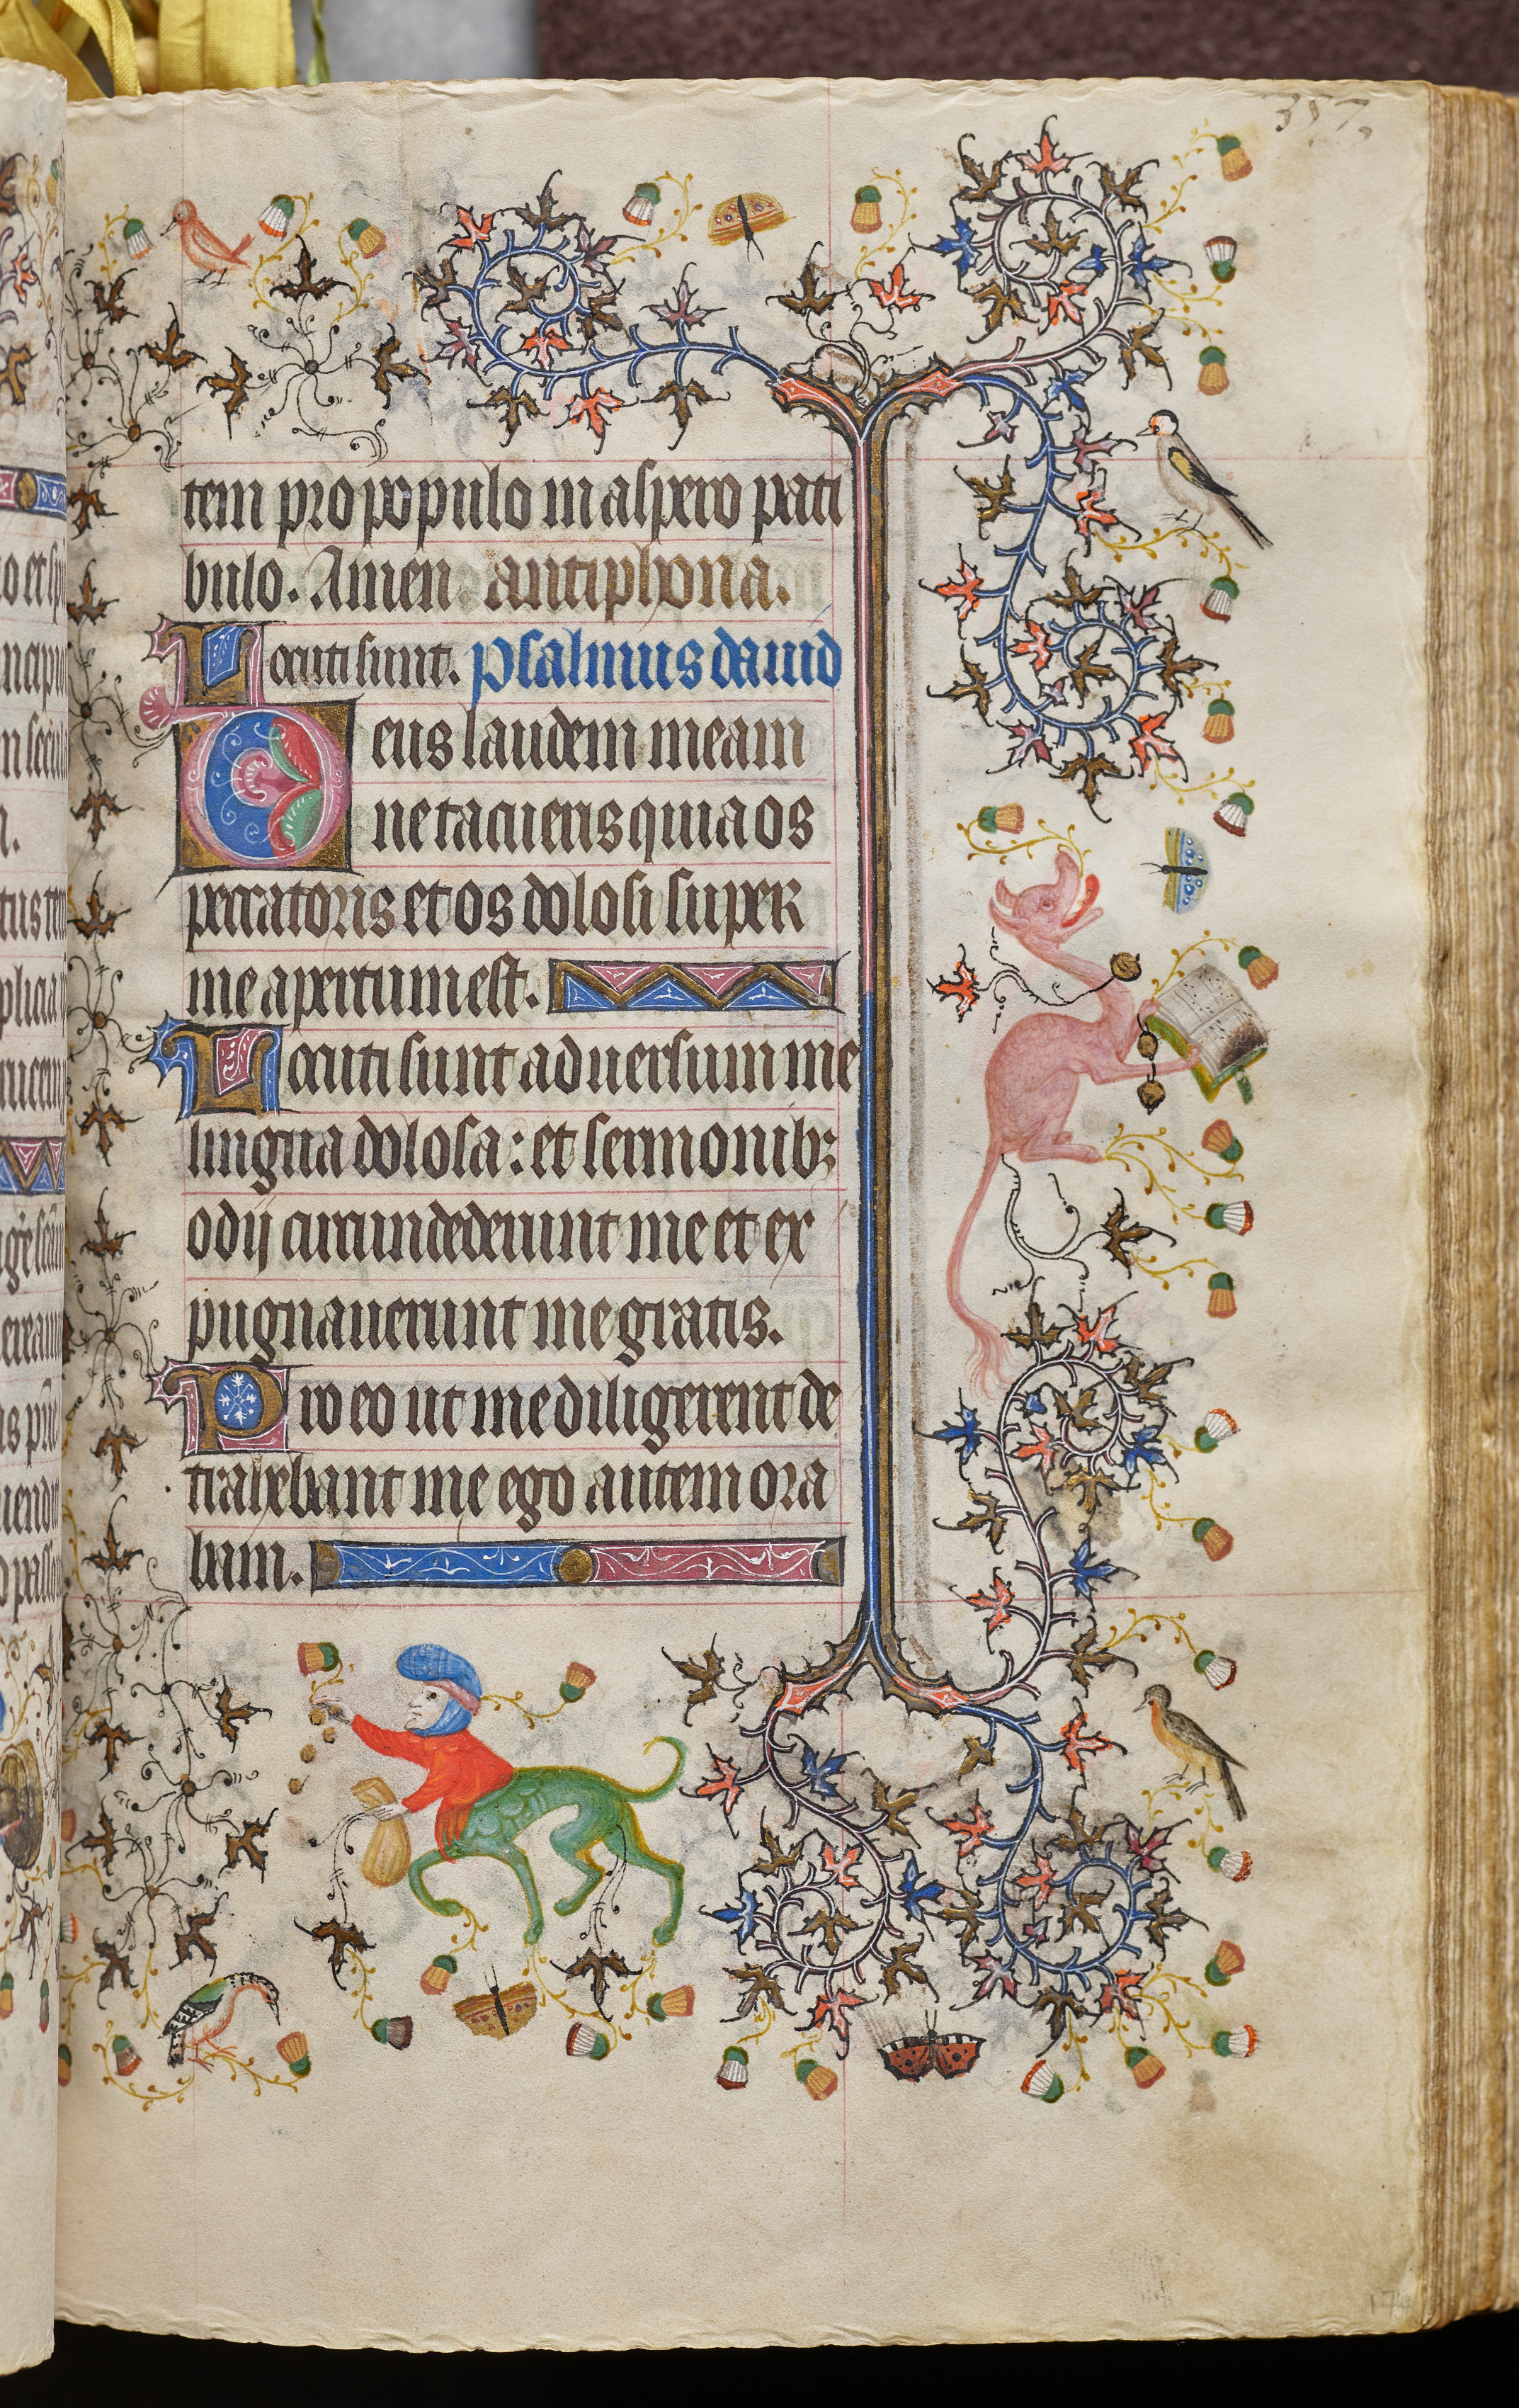 Hours of Charles the Noble, King of Navarre (1361-1425): fol. 174r, Text